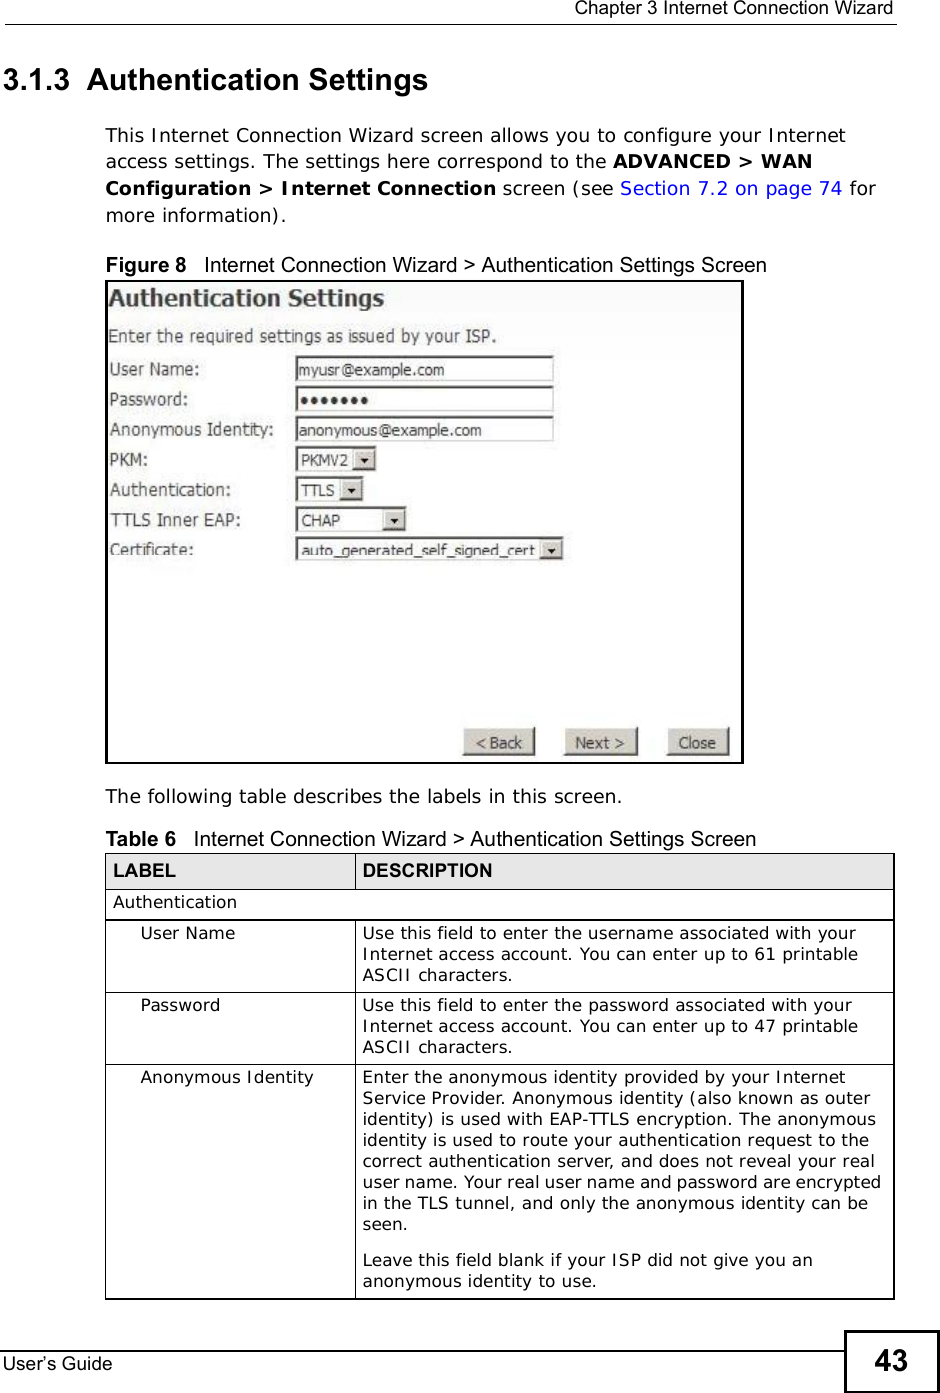  Chapter 3Internet Connection WizardUser s Guide 433.1.3  Authentication SettingsThis Internet Connection Wizard screen allows you to configure your Internet access settings. The settings here correspond to the ADVANCED &gt; WAN Configuration &gt; Internet Connection screen (see Section 7.2 on page 74 for more information).Figure 8   Internet Connection Wizard &gt; Authentication Settings ScreenThe following table describes the labels in this screen.Table 6   Internet Connection Wizard &gt; Authentication Settings ScreenLABEL DESCRIPTIONAuthenticationUser NameUse this field to enter the username associated with your Internet access account. You can enter up to 61 printable ASCII characters.PasswordUse this field to enter the password associated with your Internet access account. You can enter up to 47 printable ASCII characters.Anonymous IdentityEnter the anonymous identity provided by your Internet Service Provider. Anonymous identity (also known as outer identity) is used with EAP-TTLS encryption. The anonymous identity is used to route your authentication request to the correct authentication server, and does not reveal your real user name. Your real user name and password are encrypted in the TLS tunnel, and only the anonymous identity can be seen.Leave this field blank if your ISP did not give you an anonymous identity to use.